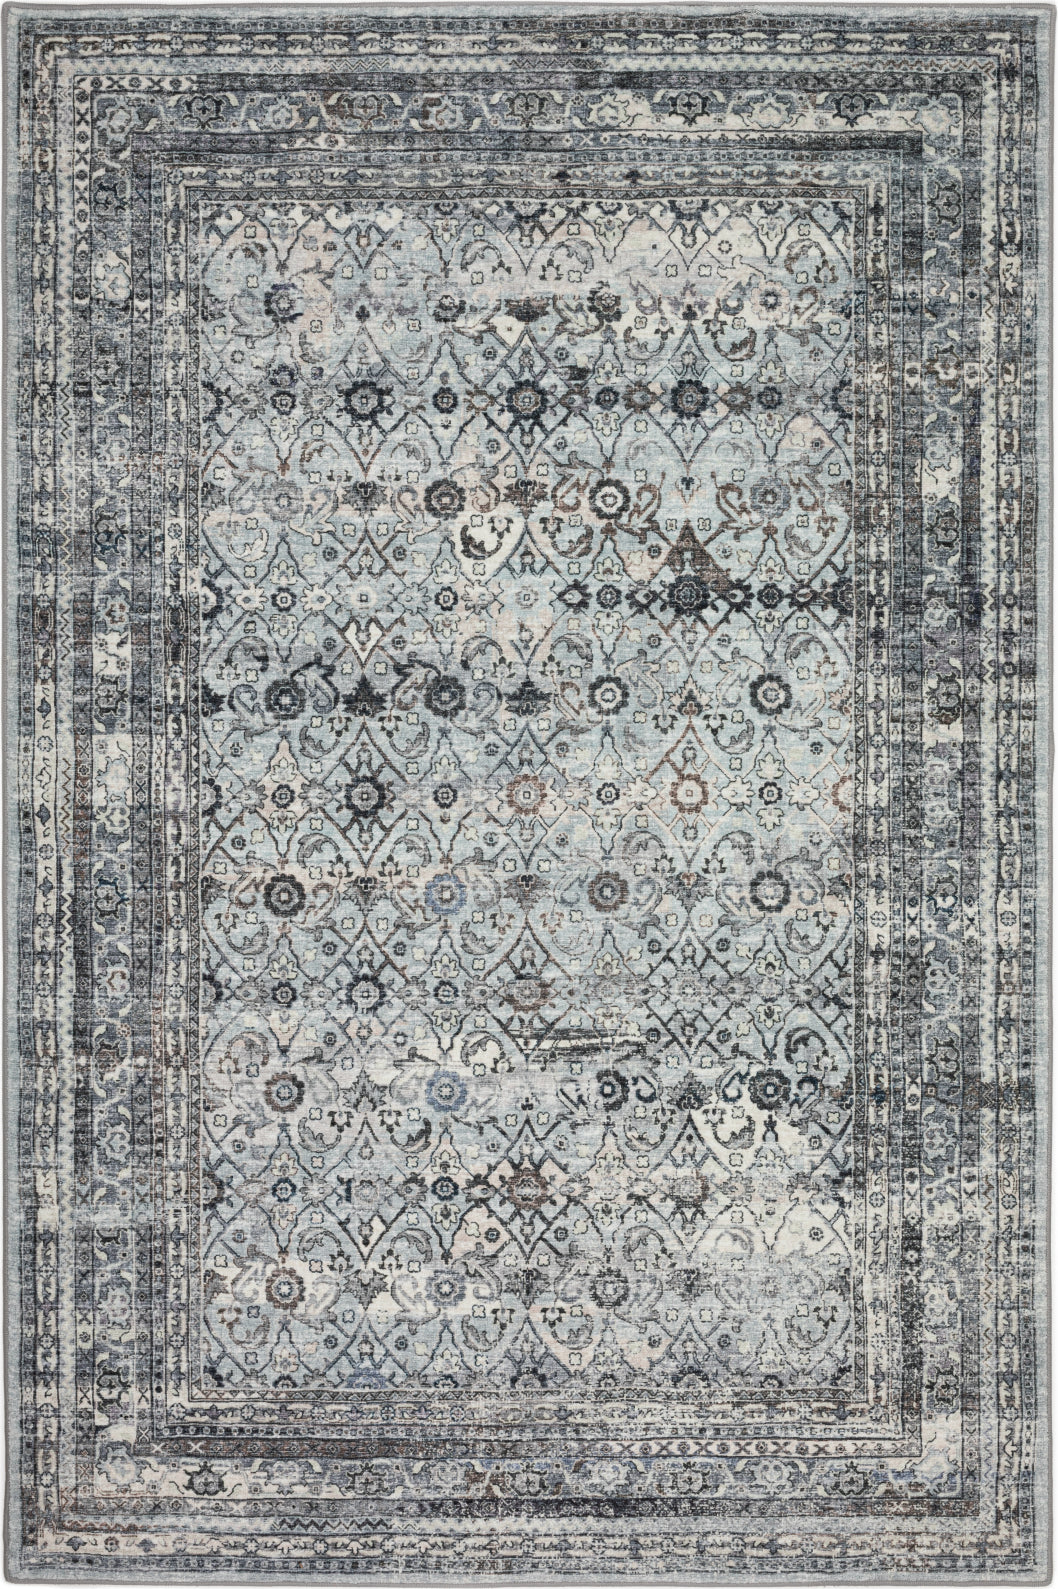 Dalyn Jericho JC7 Pewter Area Rug main image